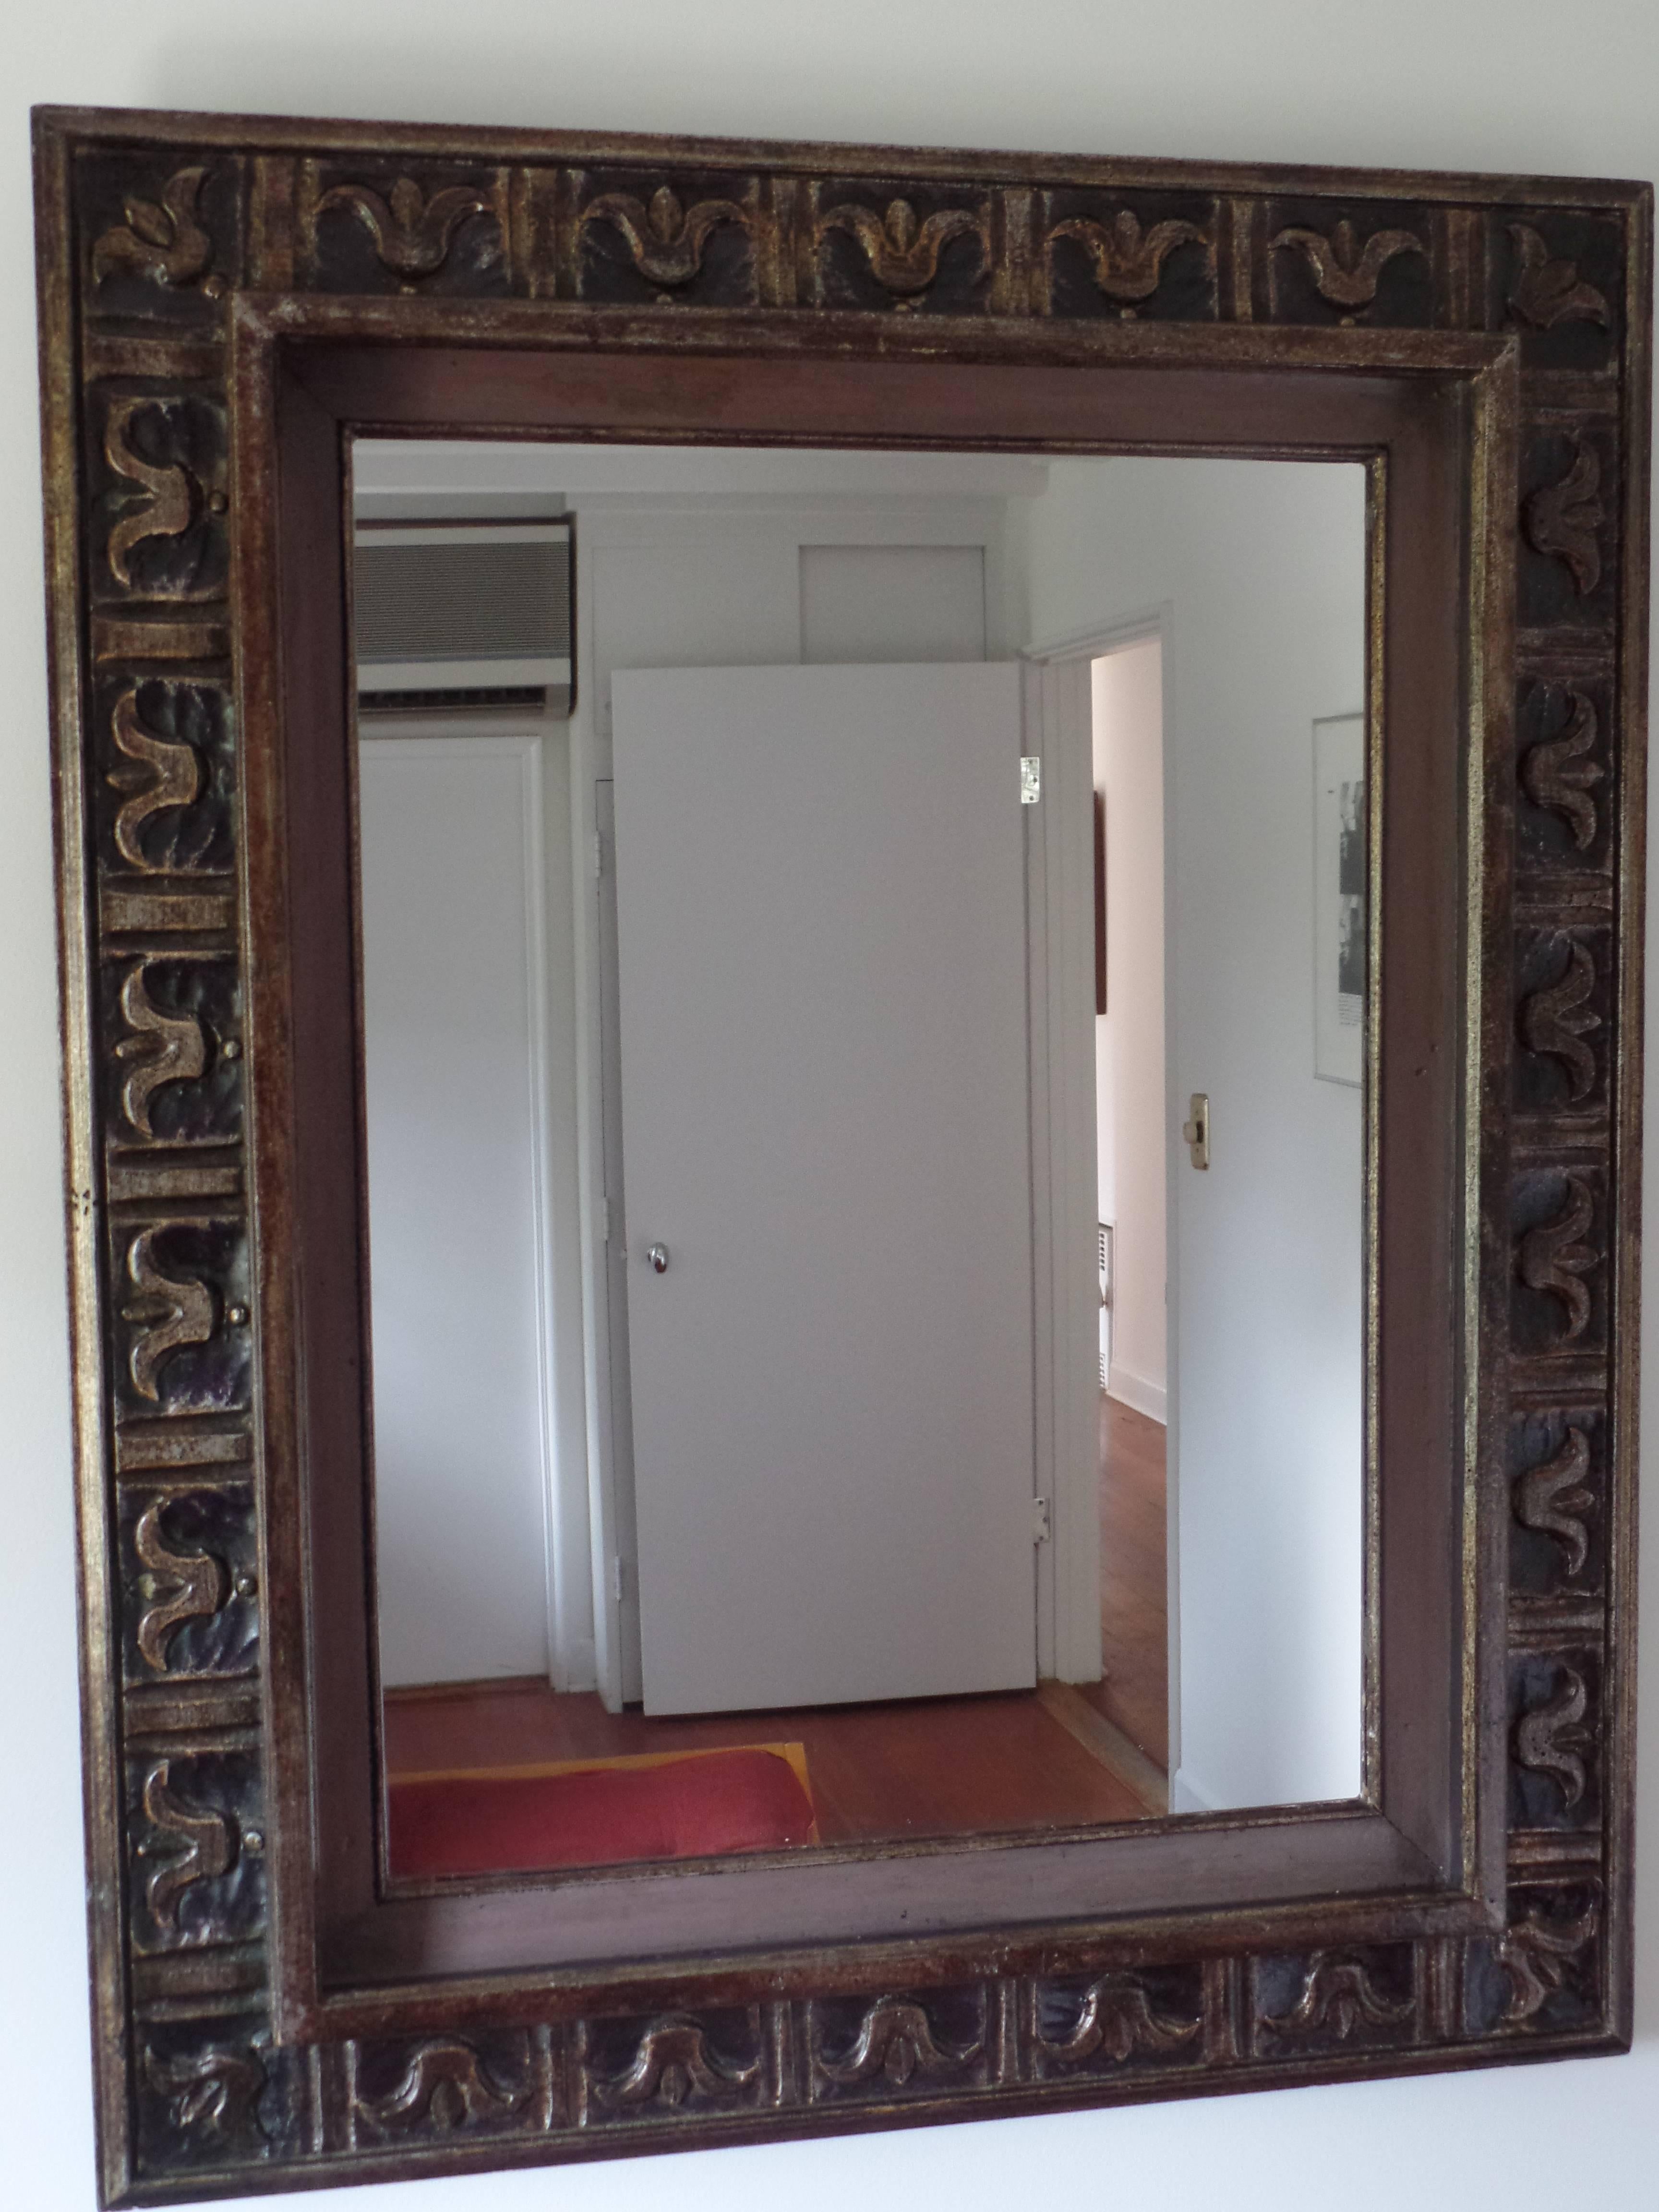 French 1940s wall mirror / frame in the modern neoclassical spirit with carved fleur d'lys motifs and Doric columns arranged sequentially around the border of the frame. The frame is highlighted with subtle silver and gold leafed details against a